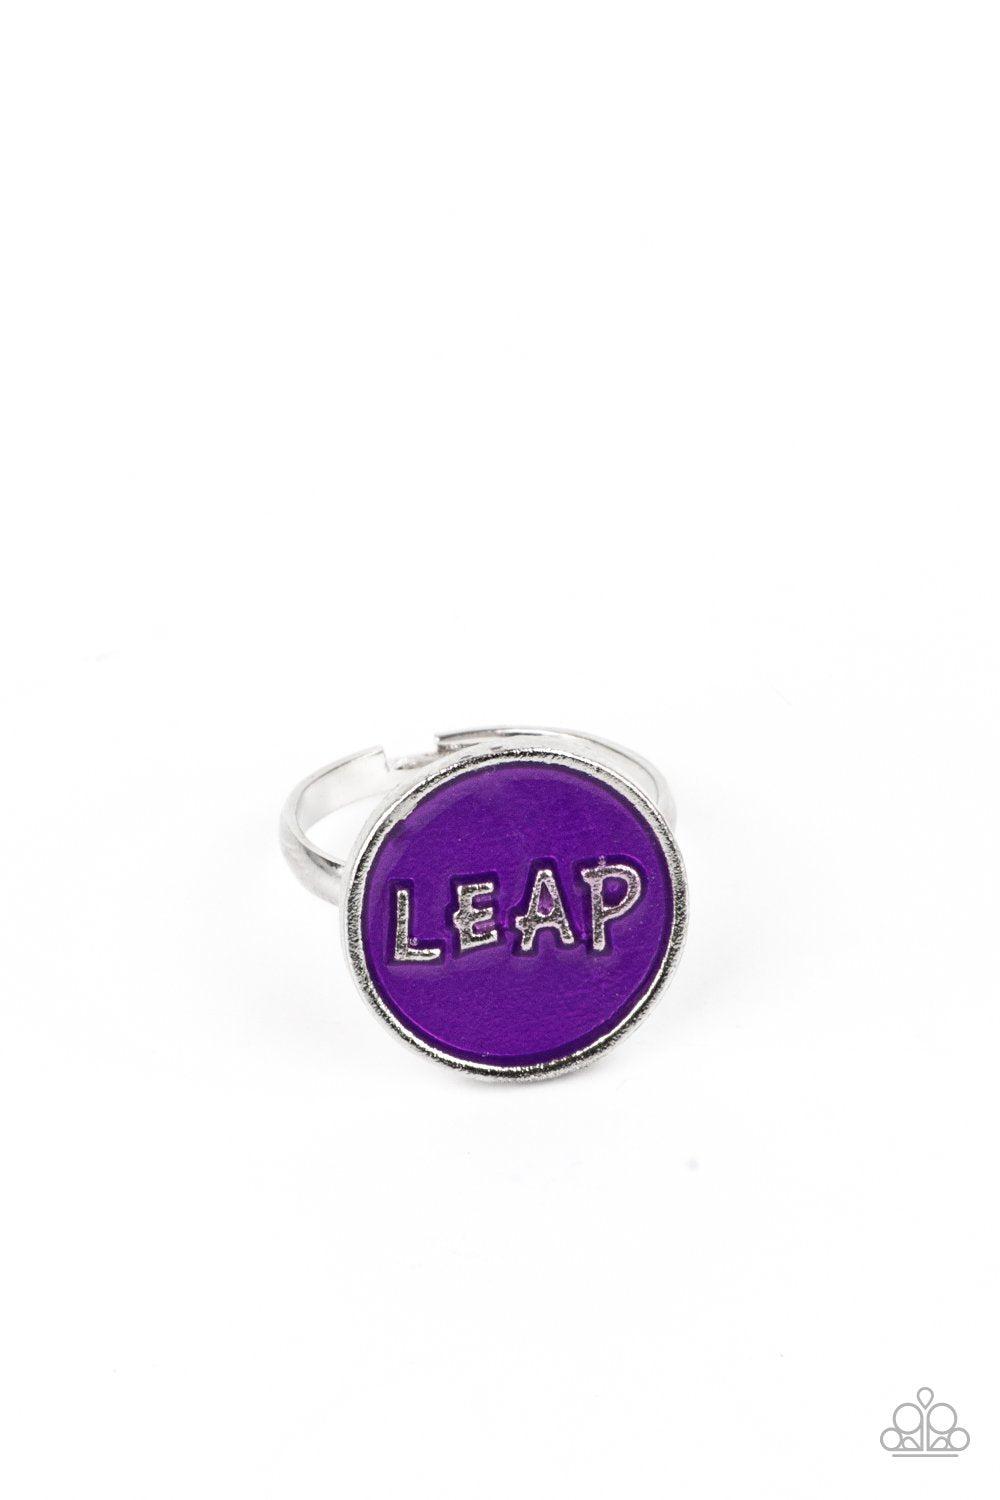 Starlet Shimmer Children's Colorful Inspirational Rings - Paparazzi Accessories (set of 10) - Full set -CarasShop.com - $5 Jewelry by Cara Jewels